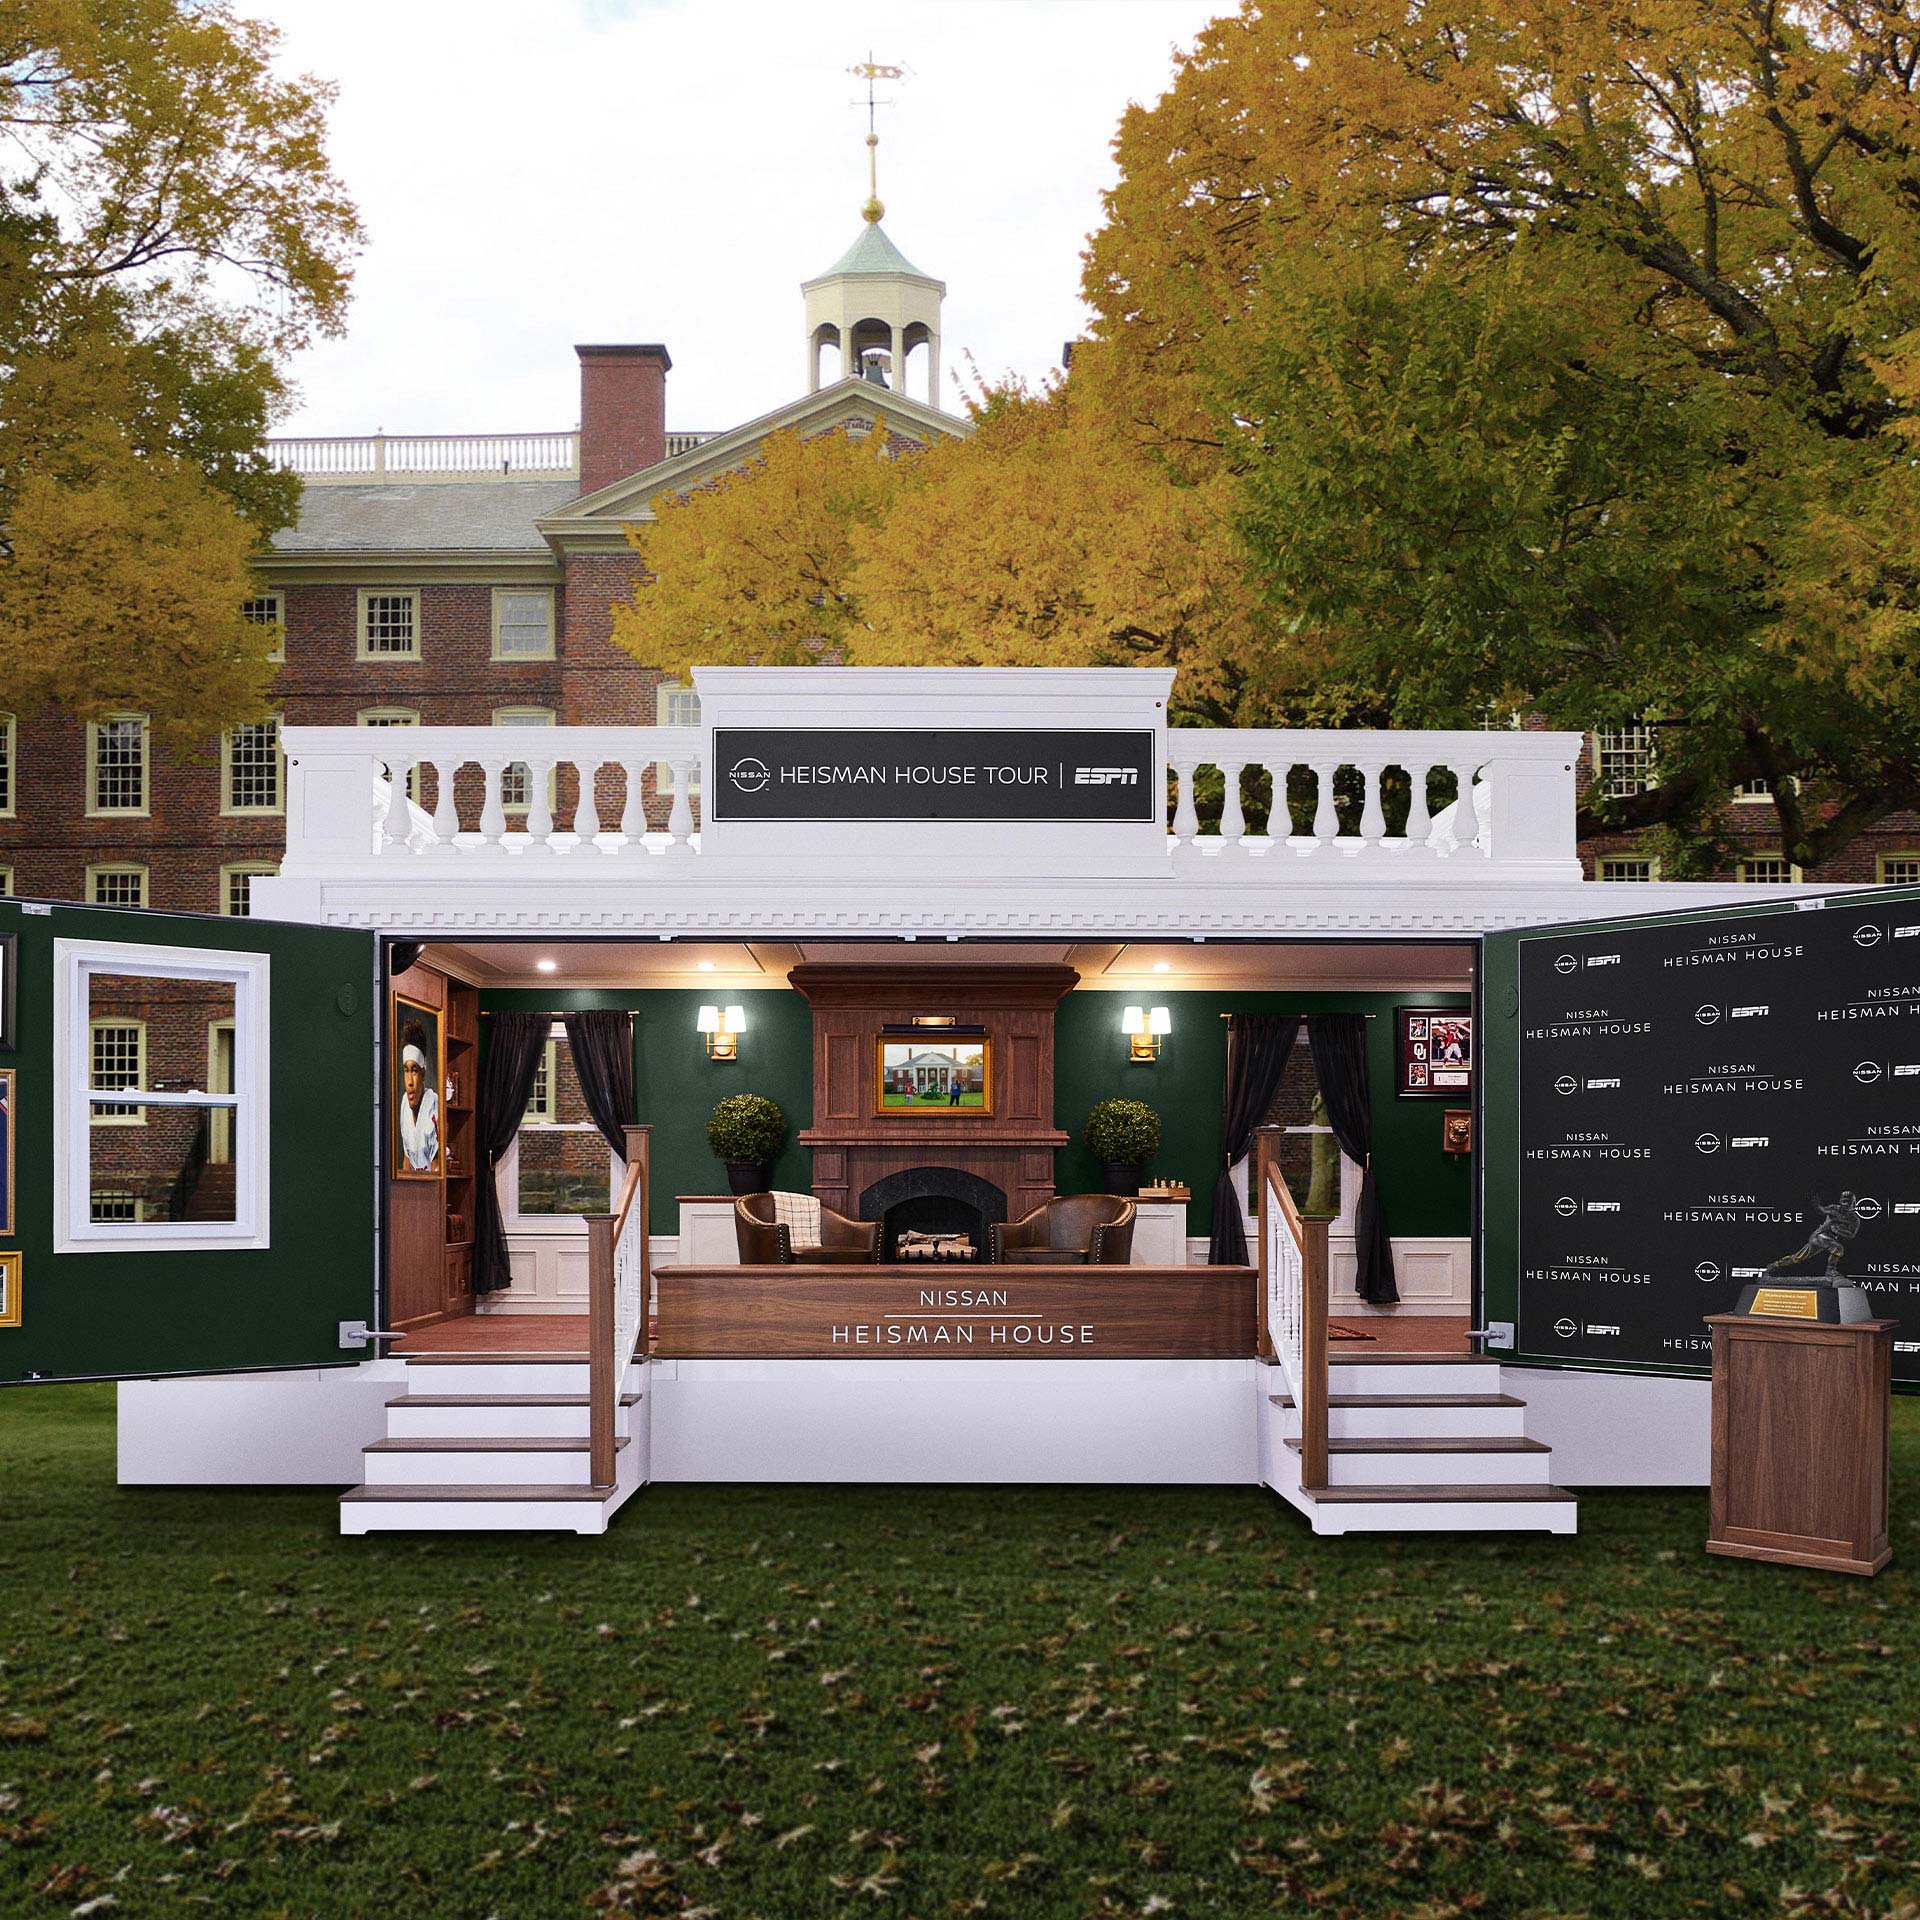 Nissan's Heisman House wall opens out and shows the entire experience crated by GMR Marketing